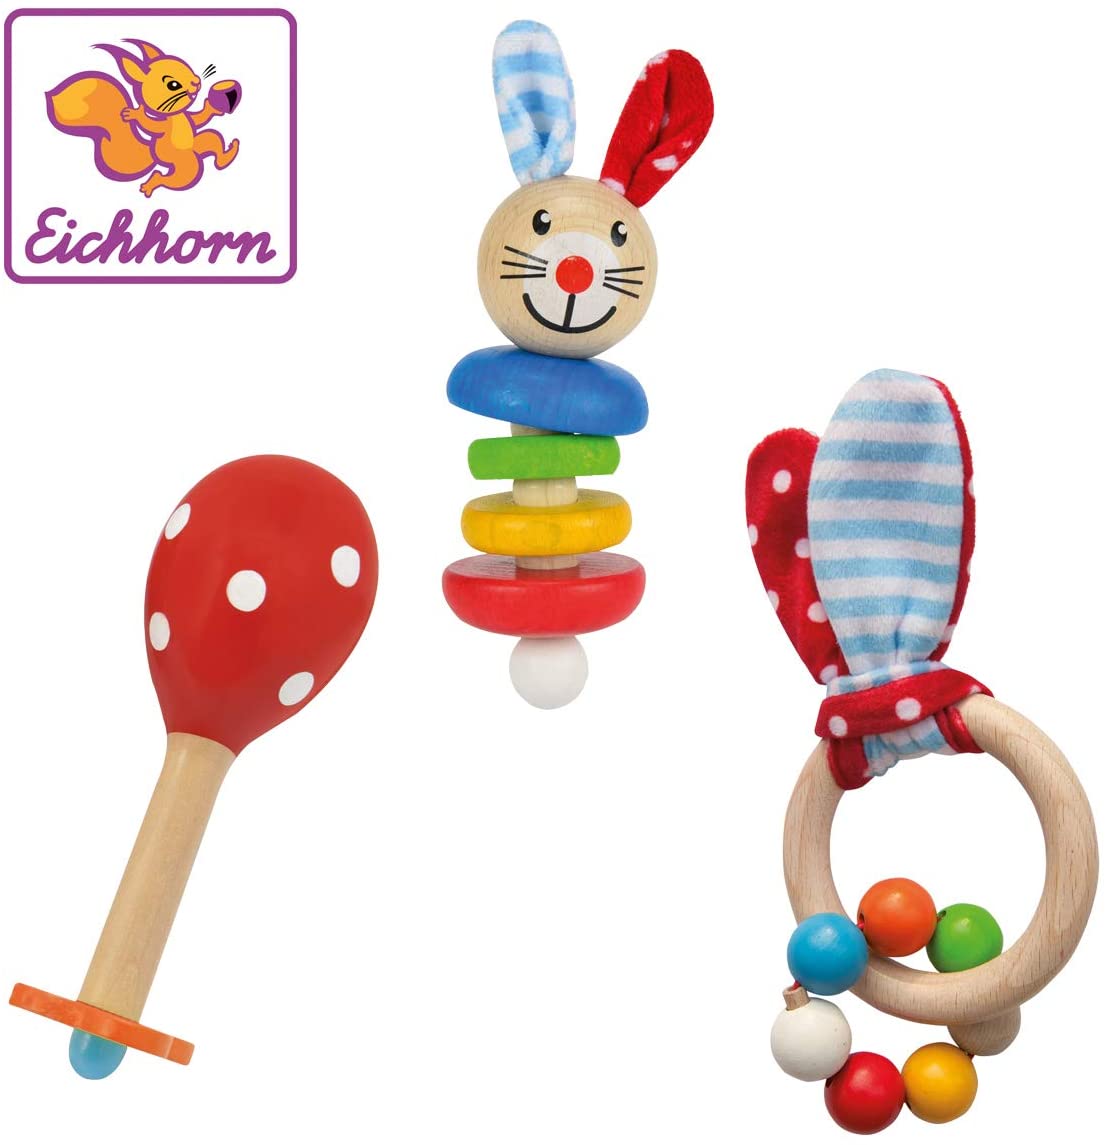 Eichhorn 100017045 Baby Starter / Gift Set with Maraca, Grasping Toy with Sound and Grasping Toy with Rabbit Motif, 3 Pieces, from 3 Months